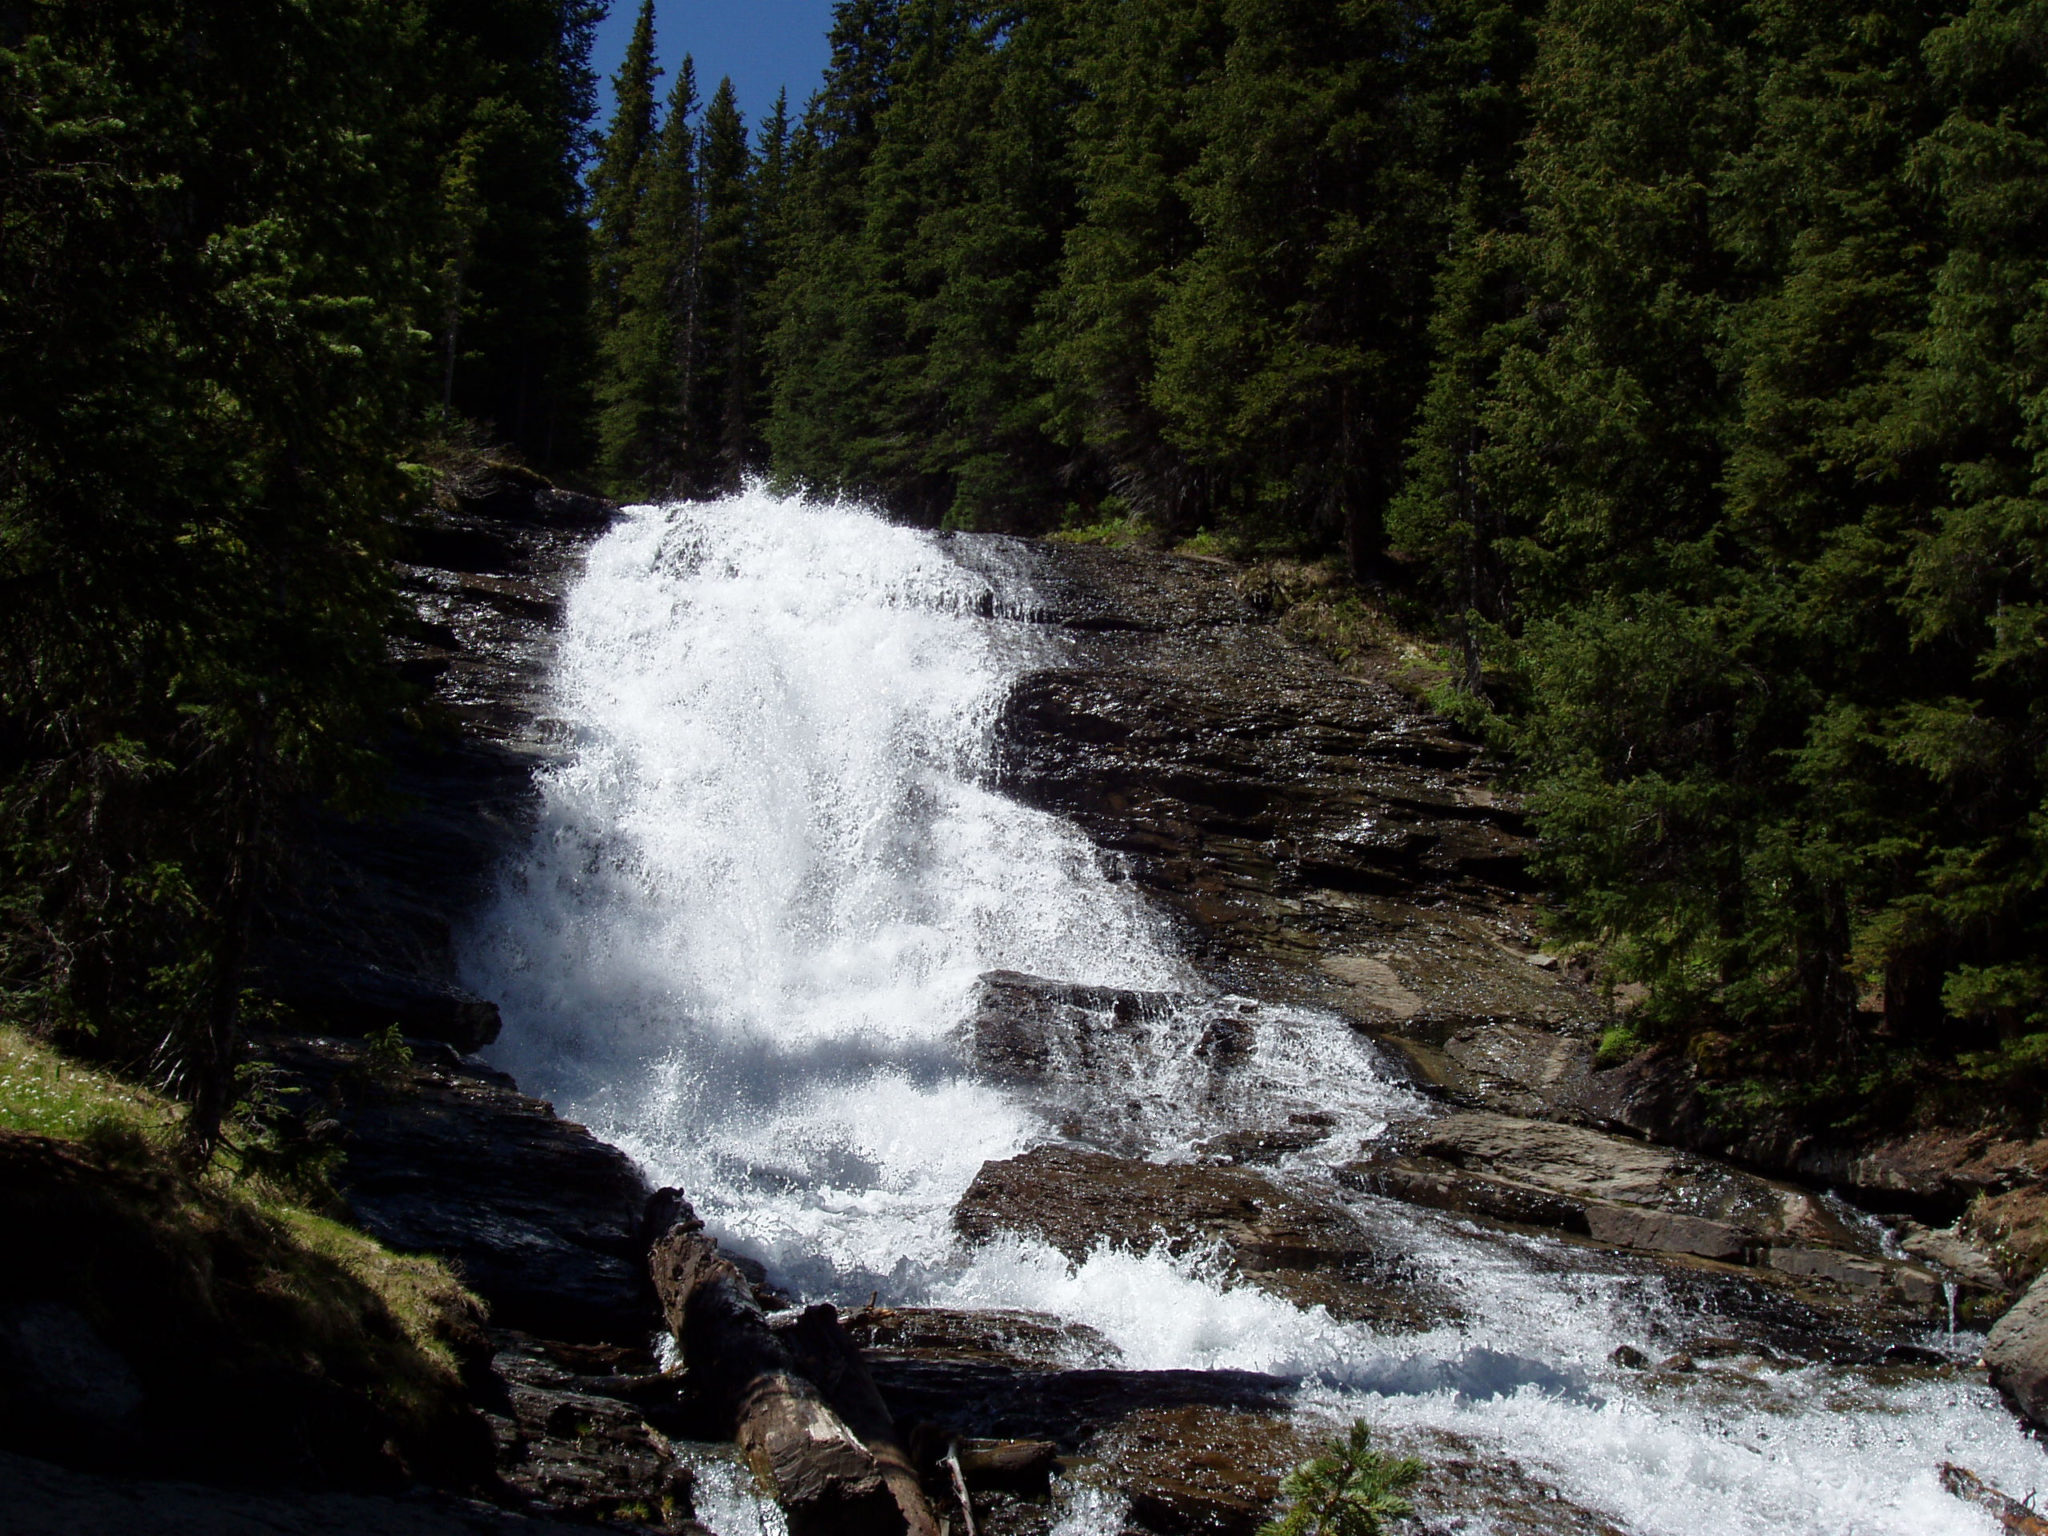 Waterfall along the Imogene Trail between Ouray and Silverton, Colorado in the Rocky Mountains.